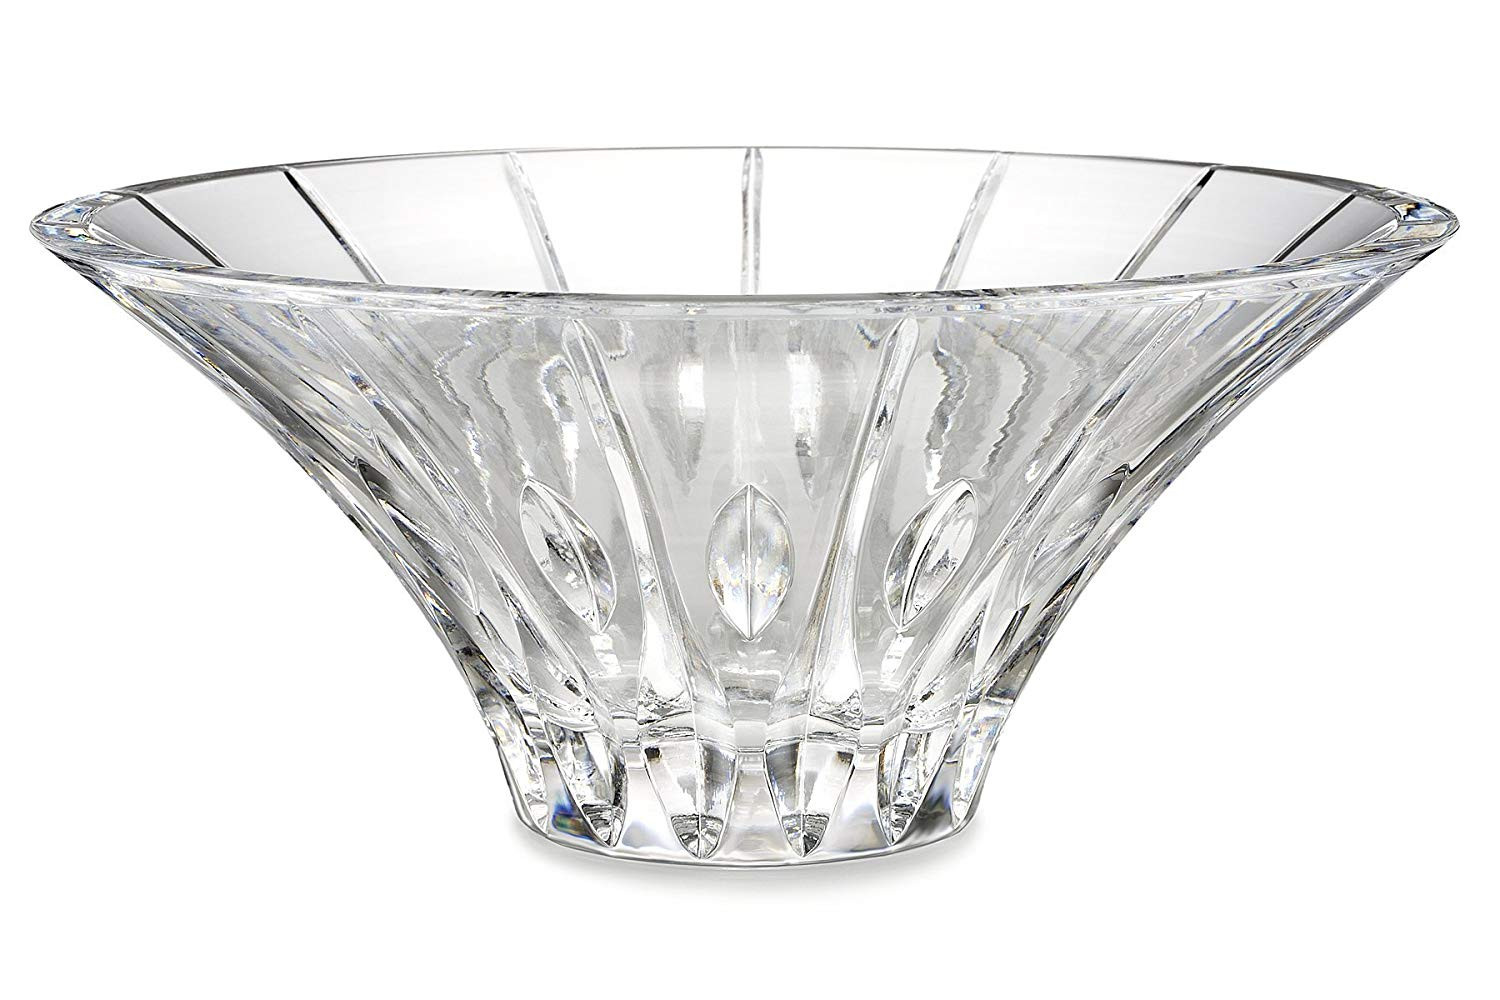 11 Lovable Marquis by Waterford Sheridan Flared 11 Crystal Vase 2024 free download marquis by waterford sheridan flared 11 crystal vase of amazon com marquis by waterford 154143 sheridan flared 10 inch bowl within amazon com marquis by waterford 154143 sheridan flared 10 i